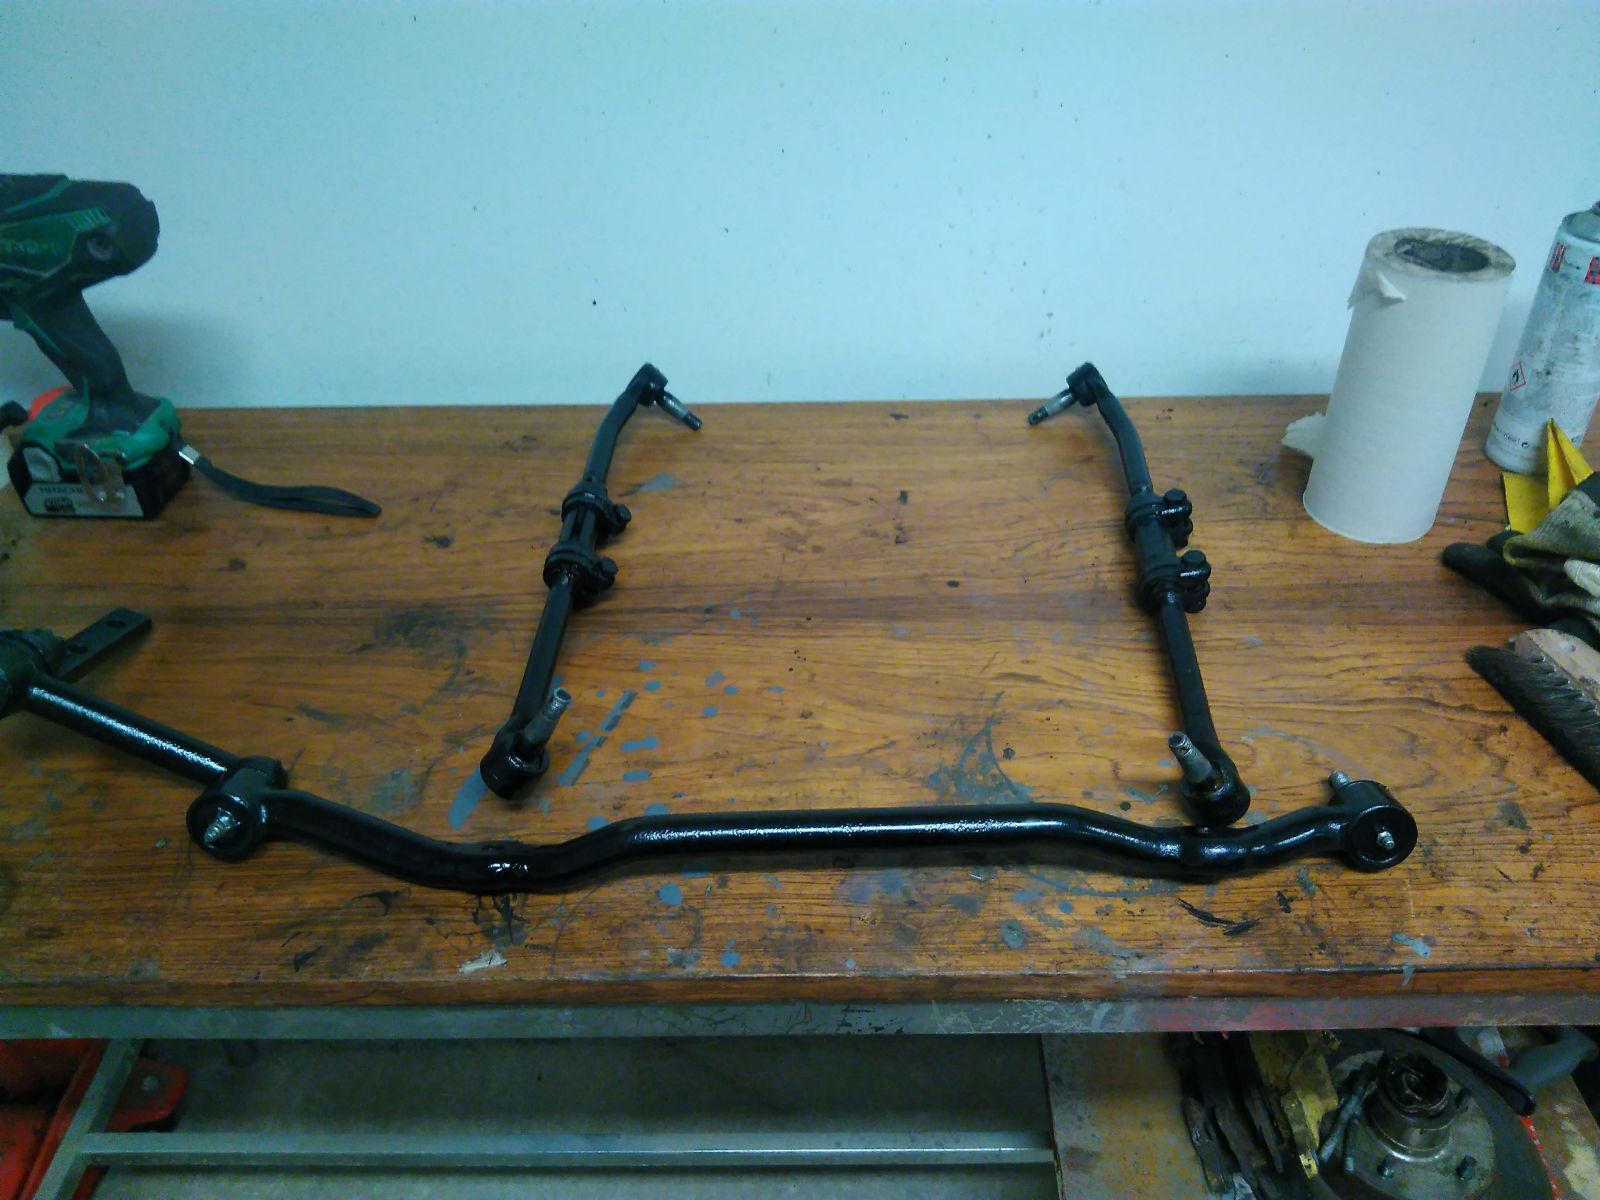 Steering linkage was updated with new baal joints and covers